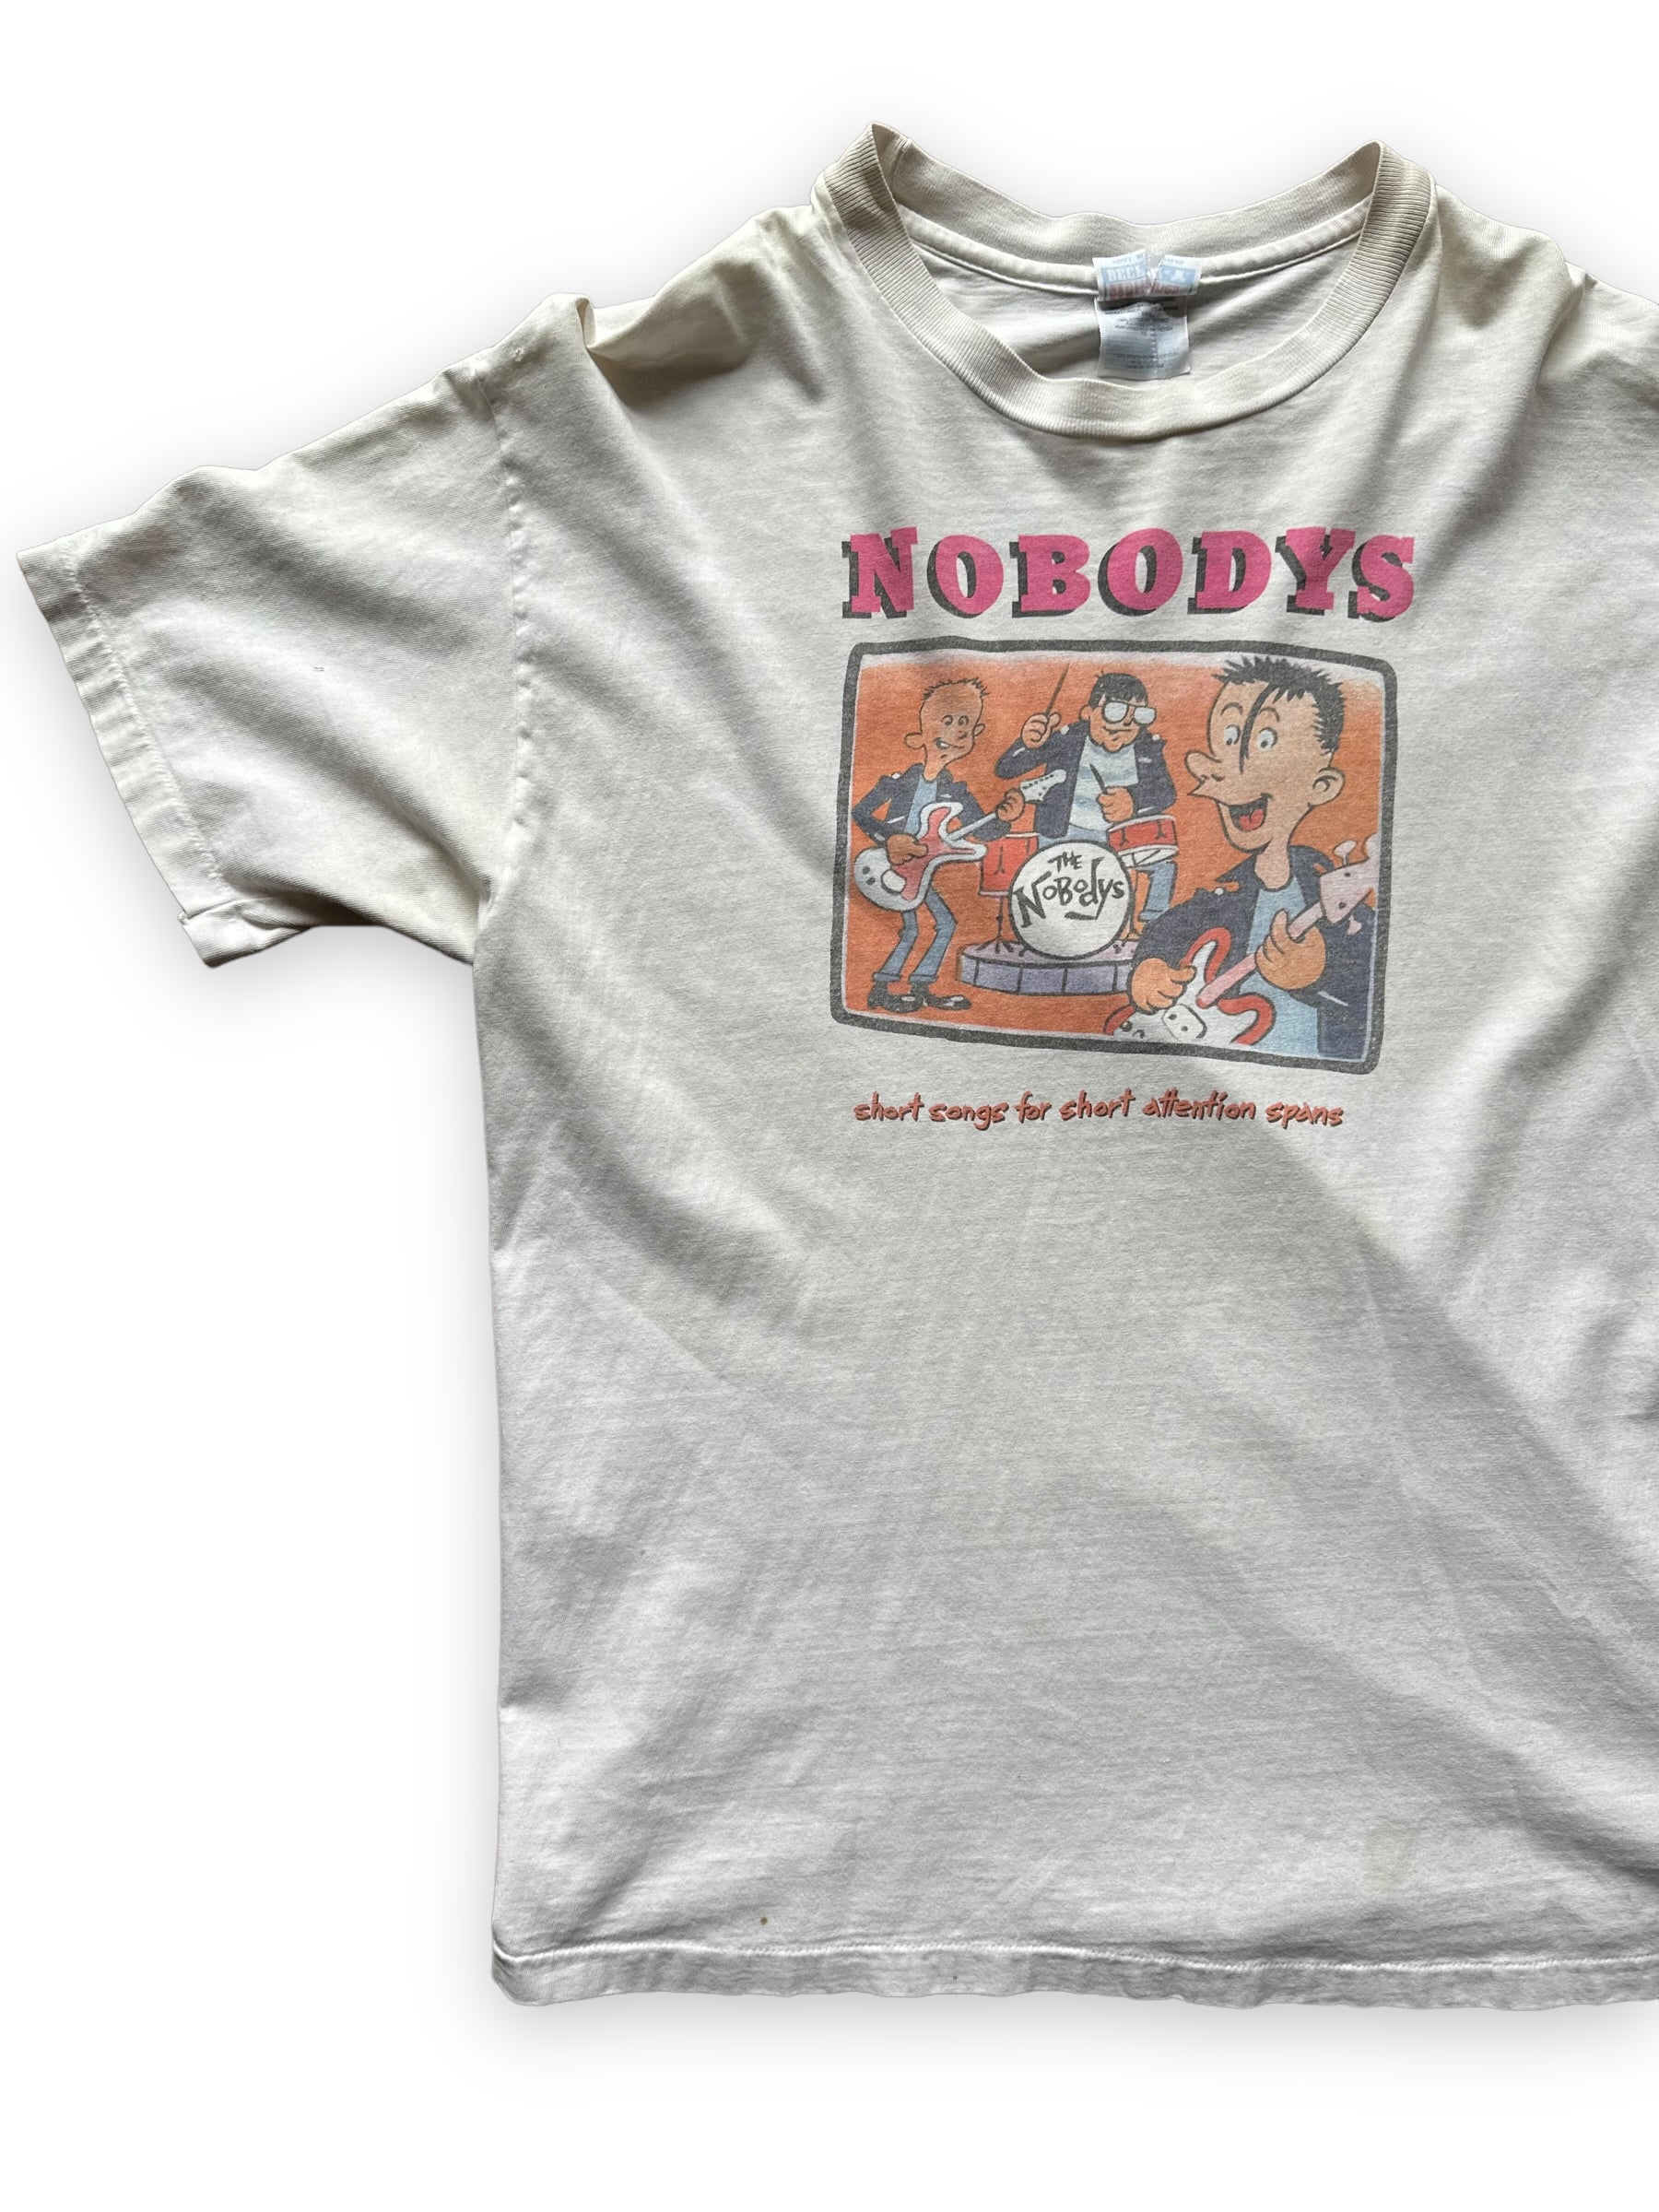 Right Side Front View of Vintage The Nobodys Short Songs For Short Attention Spans Tee SZ XL |  Hopeless Records Rock Tee | Barn Owl Vintage Seattle